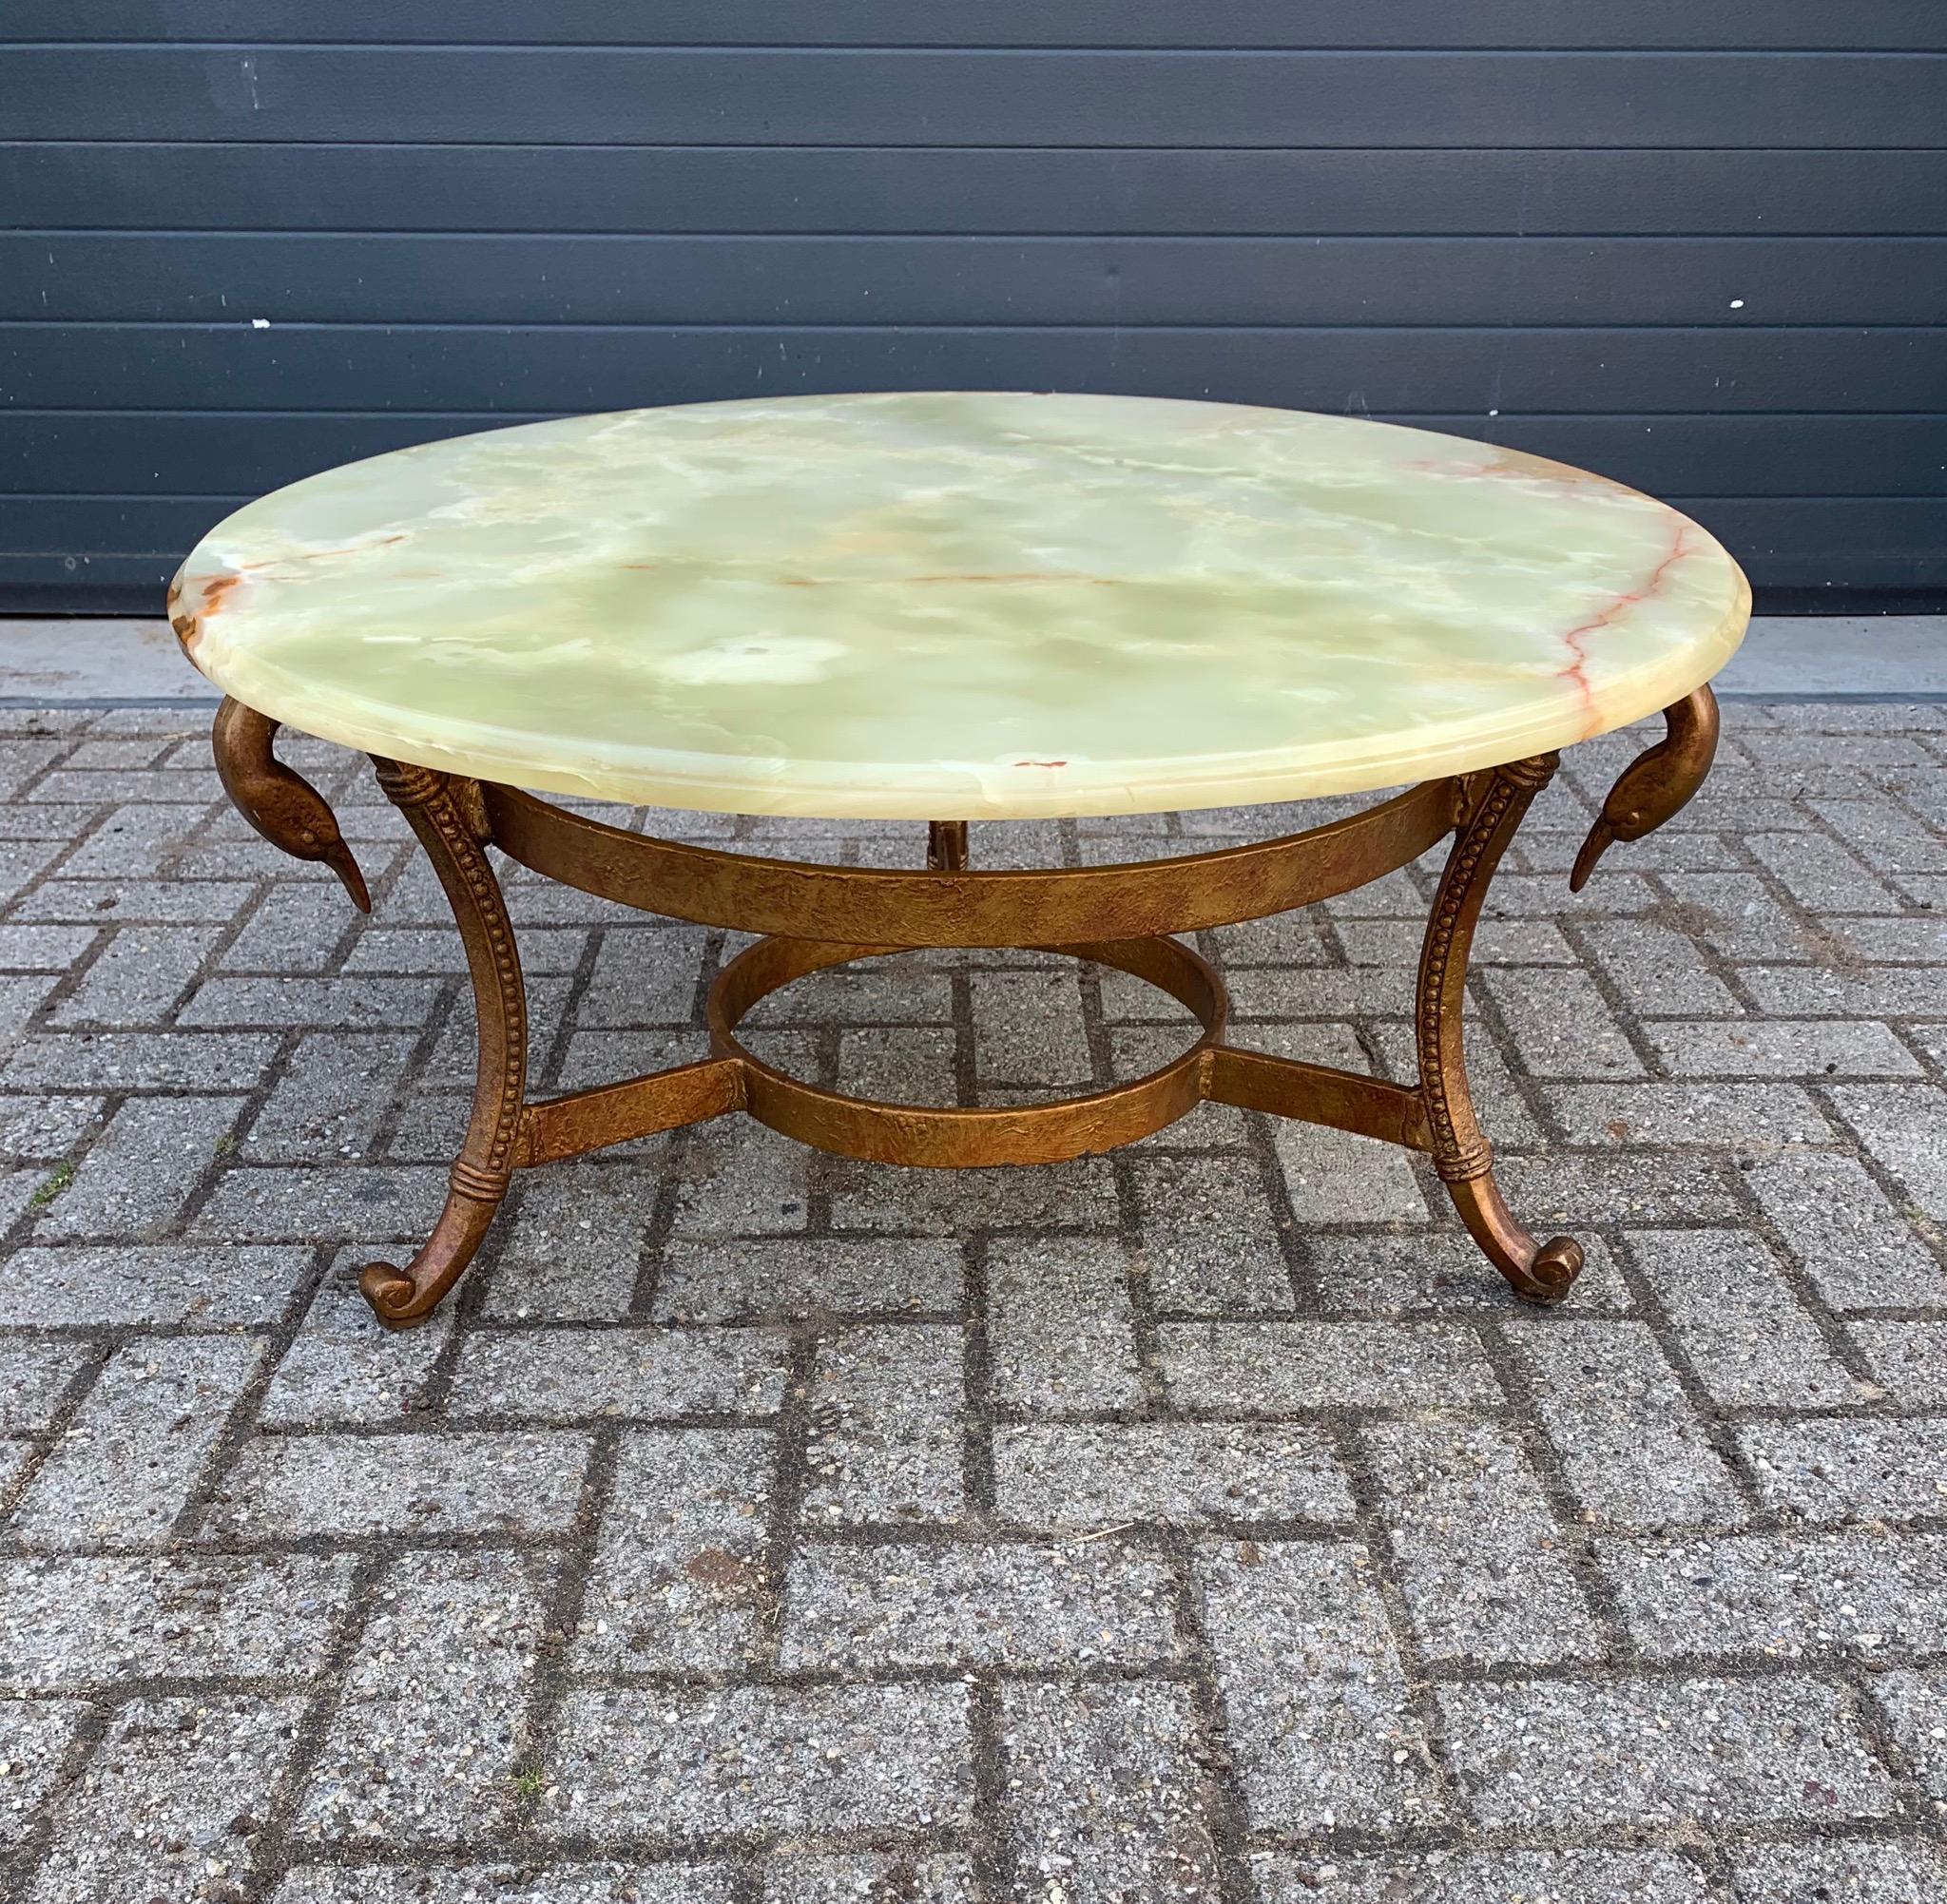 Midcentury Empire Revival Coffee Table with Onyx Top and Stylish Swan Sculptures For Sale 5